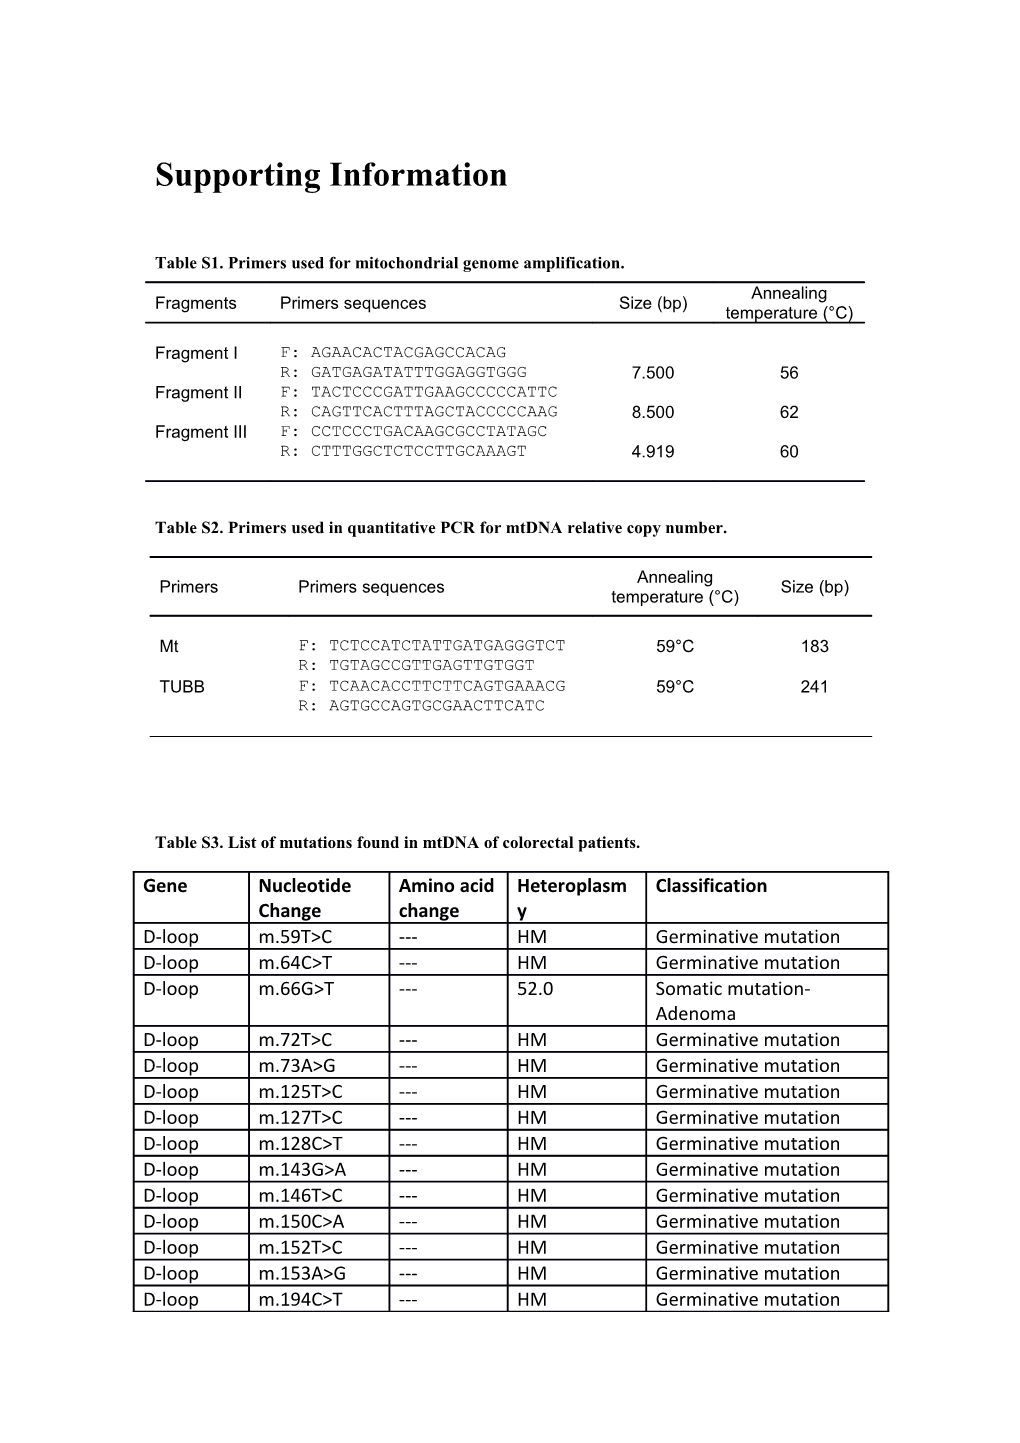 Table S1. Primers Used for Mitochondrial Genome Amplification